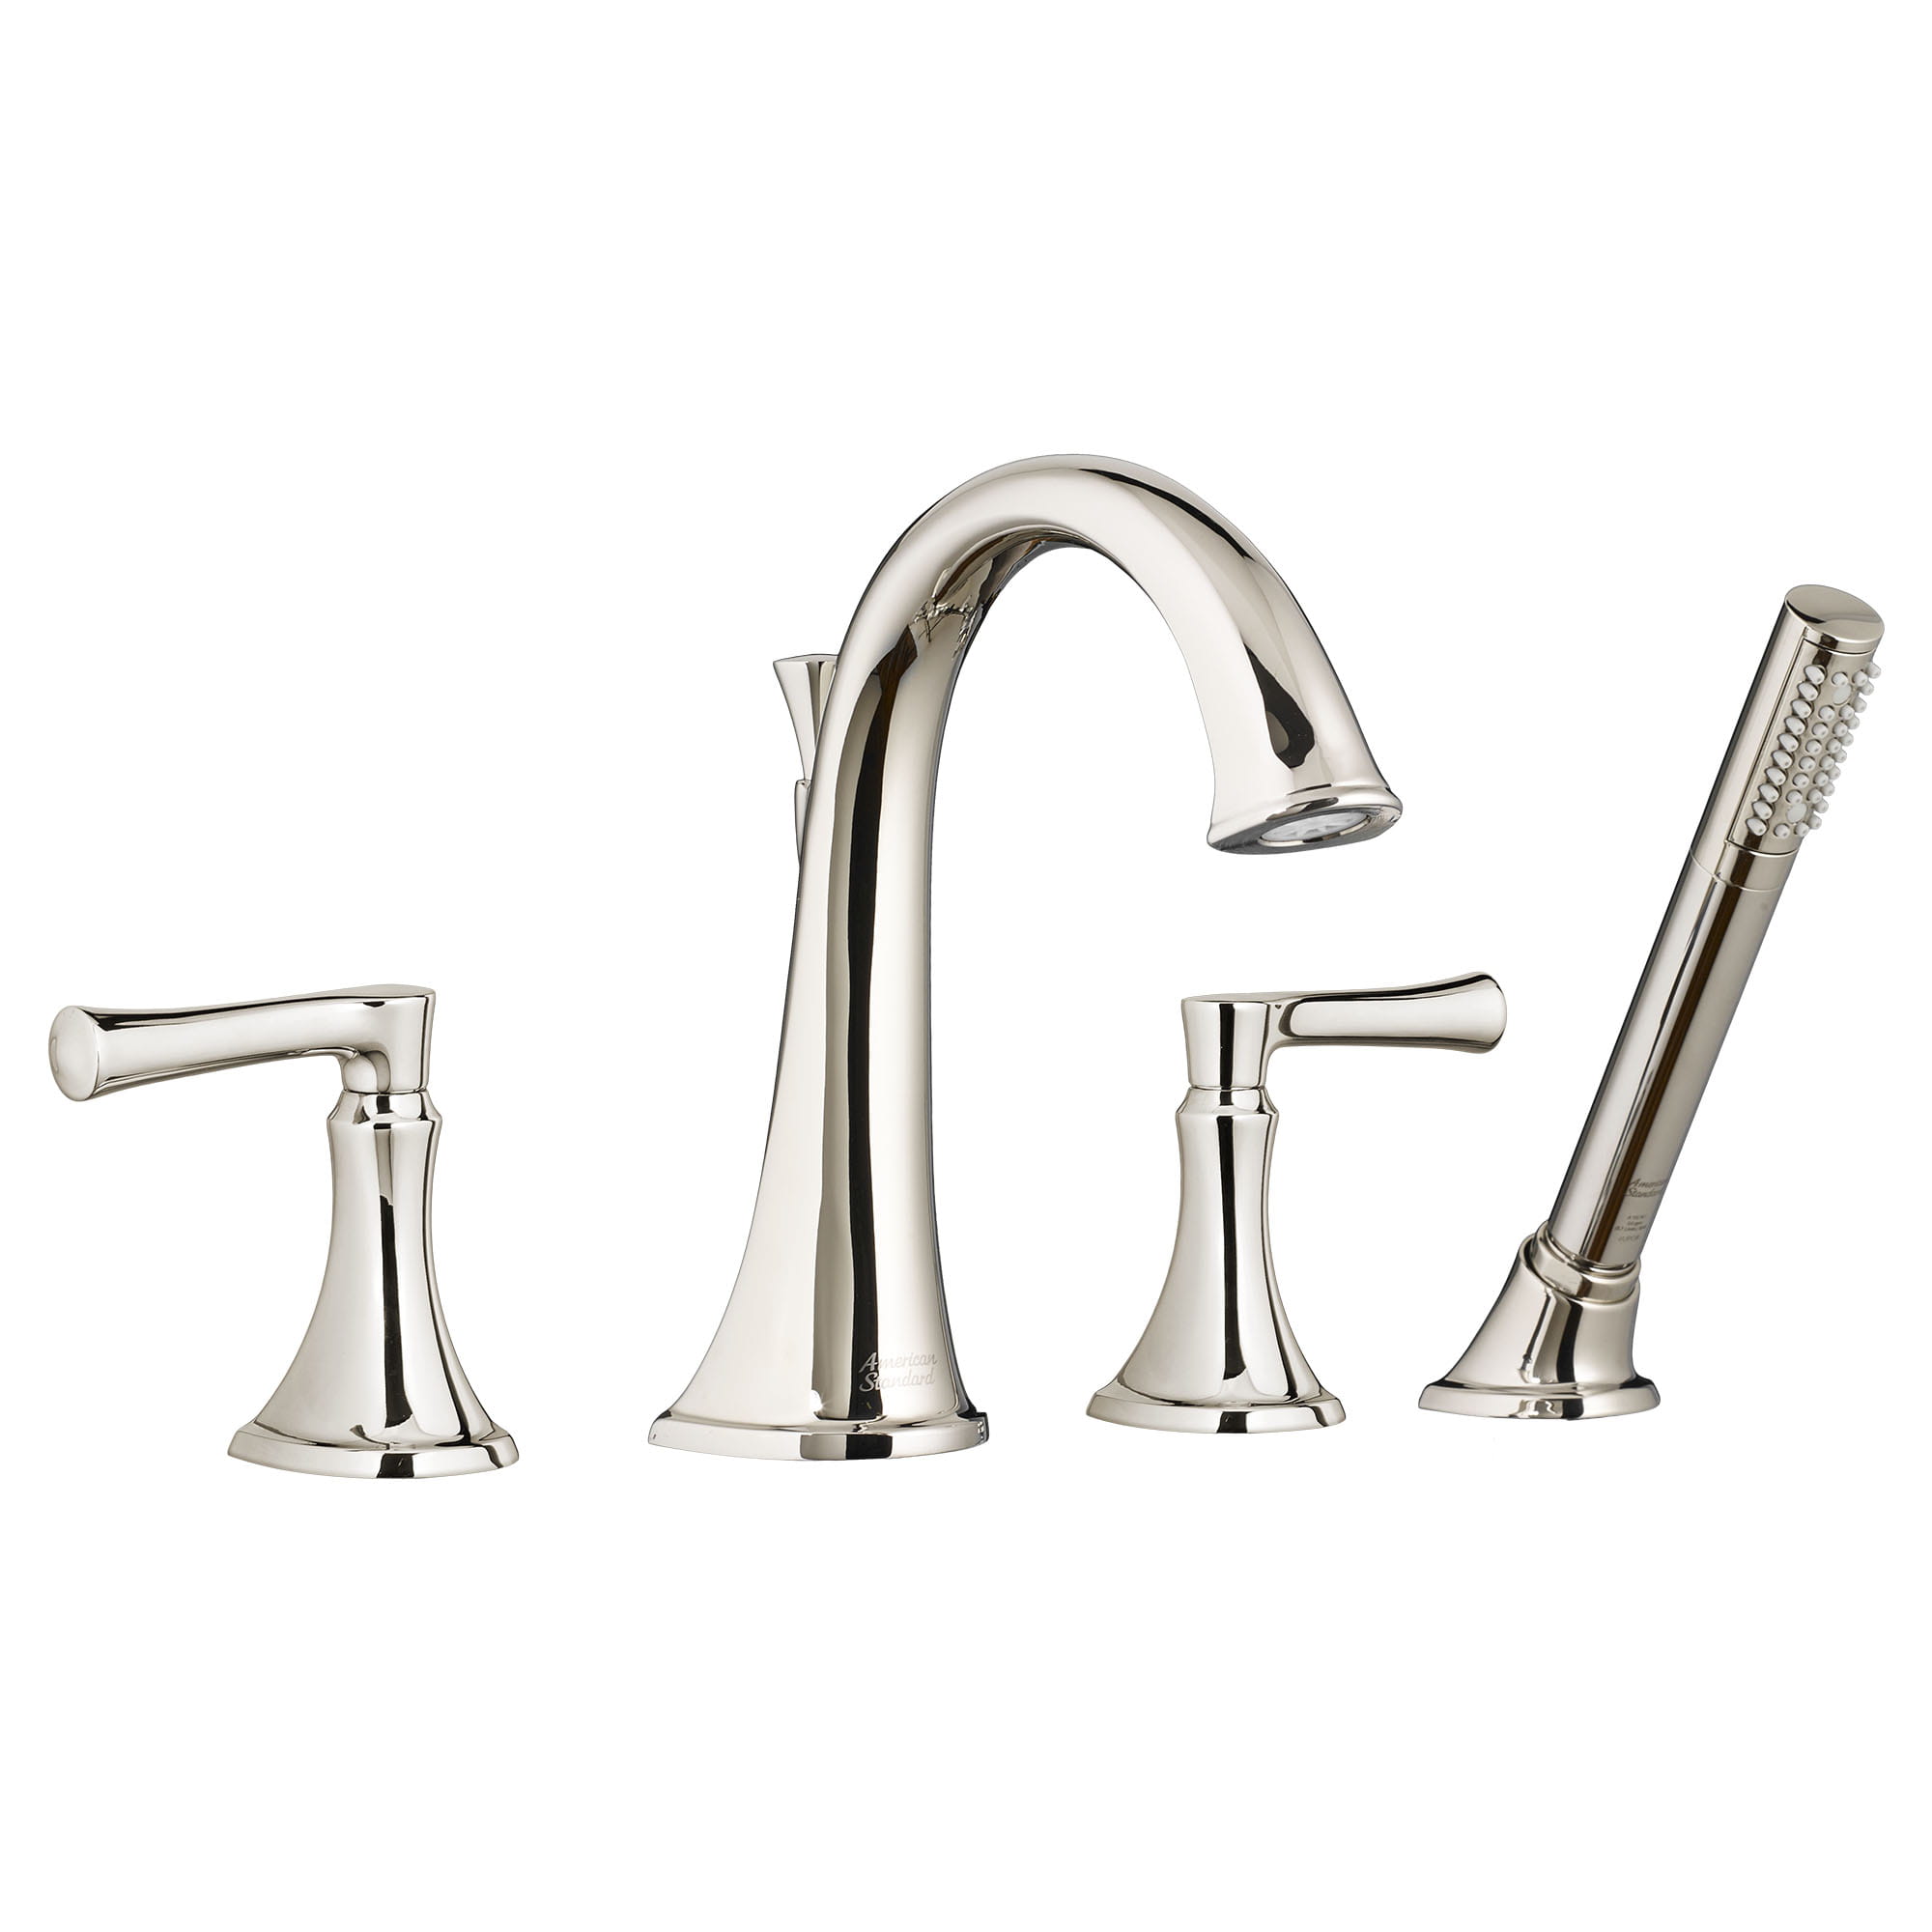 Estate Bathtub Faucet With Personal Shower for Flash Rough In Valve With Lever Handles POLISHED  NICKEL